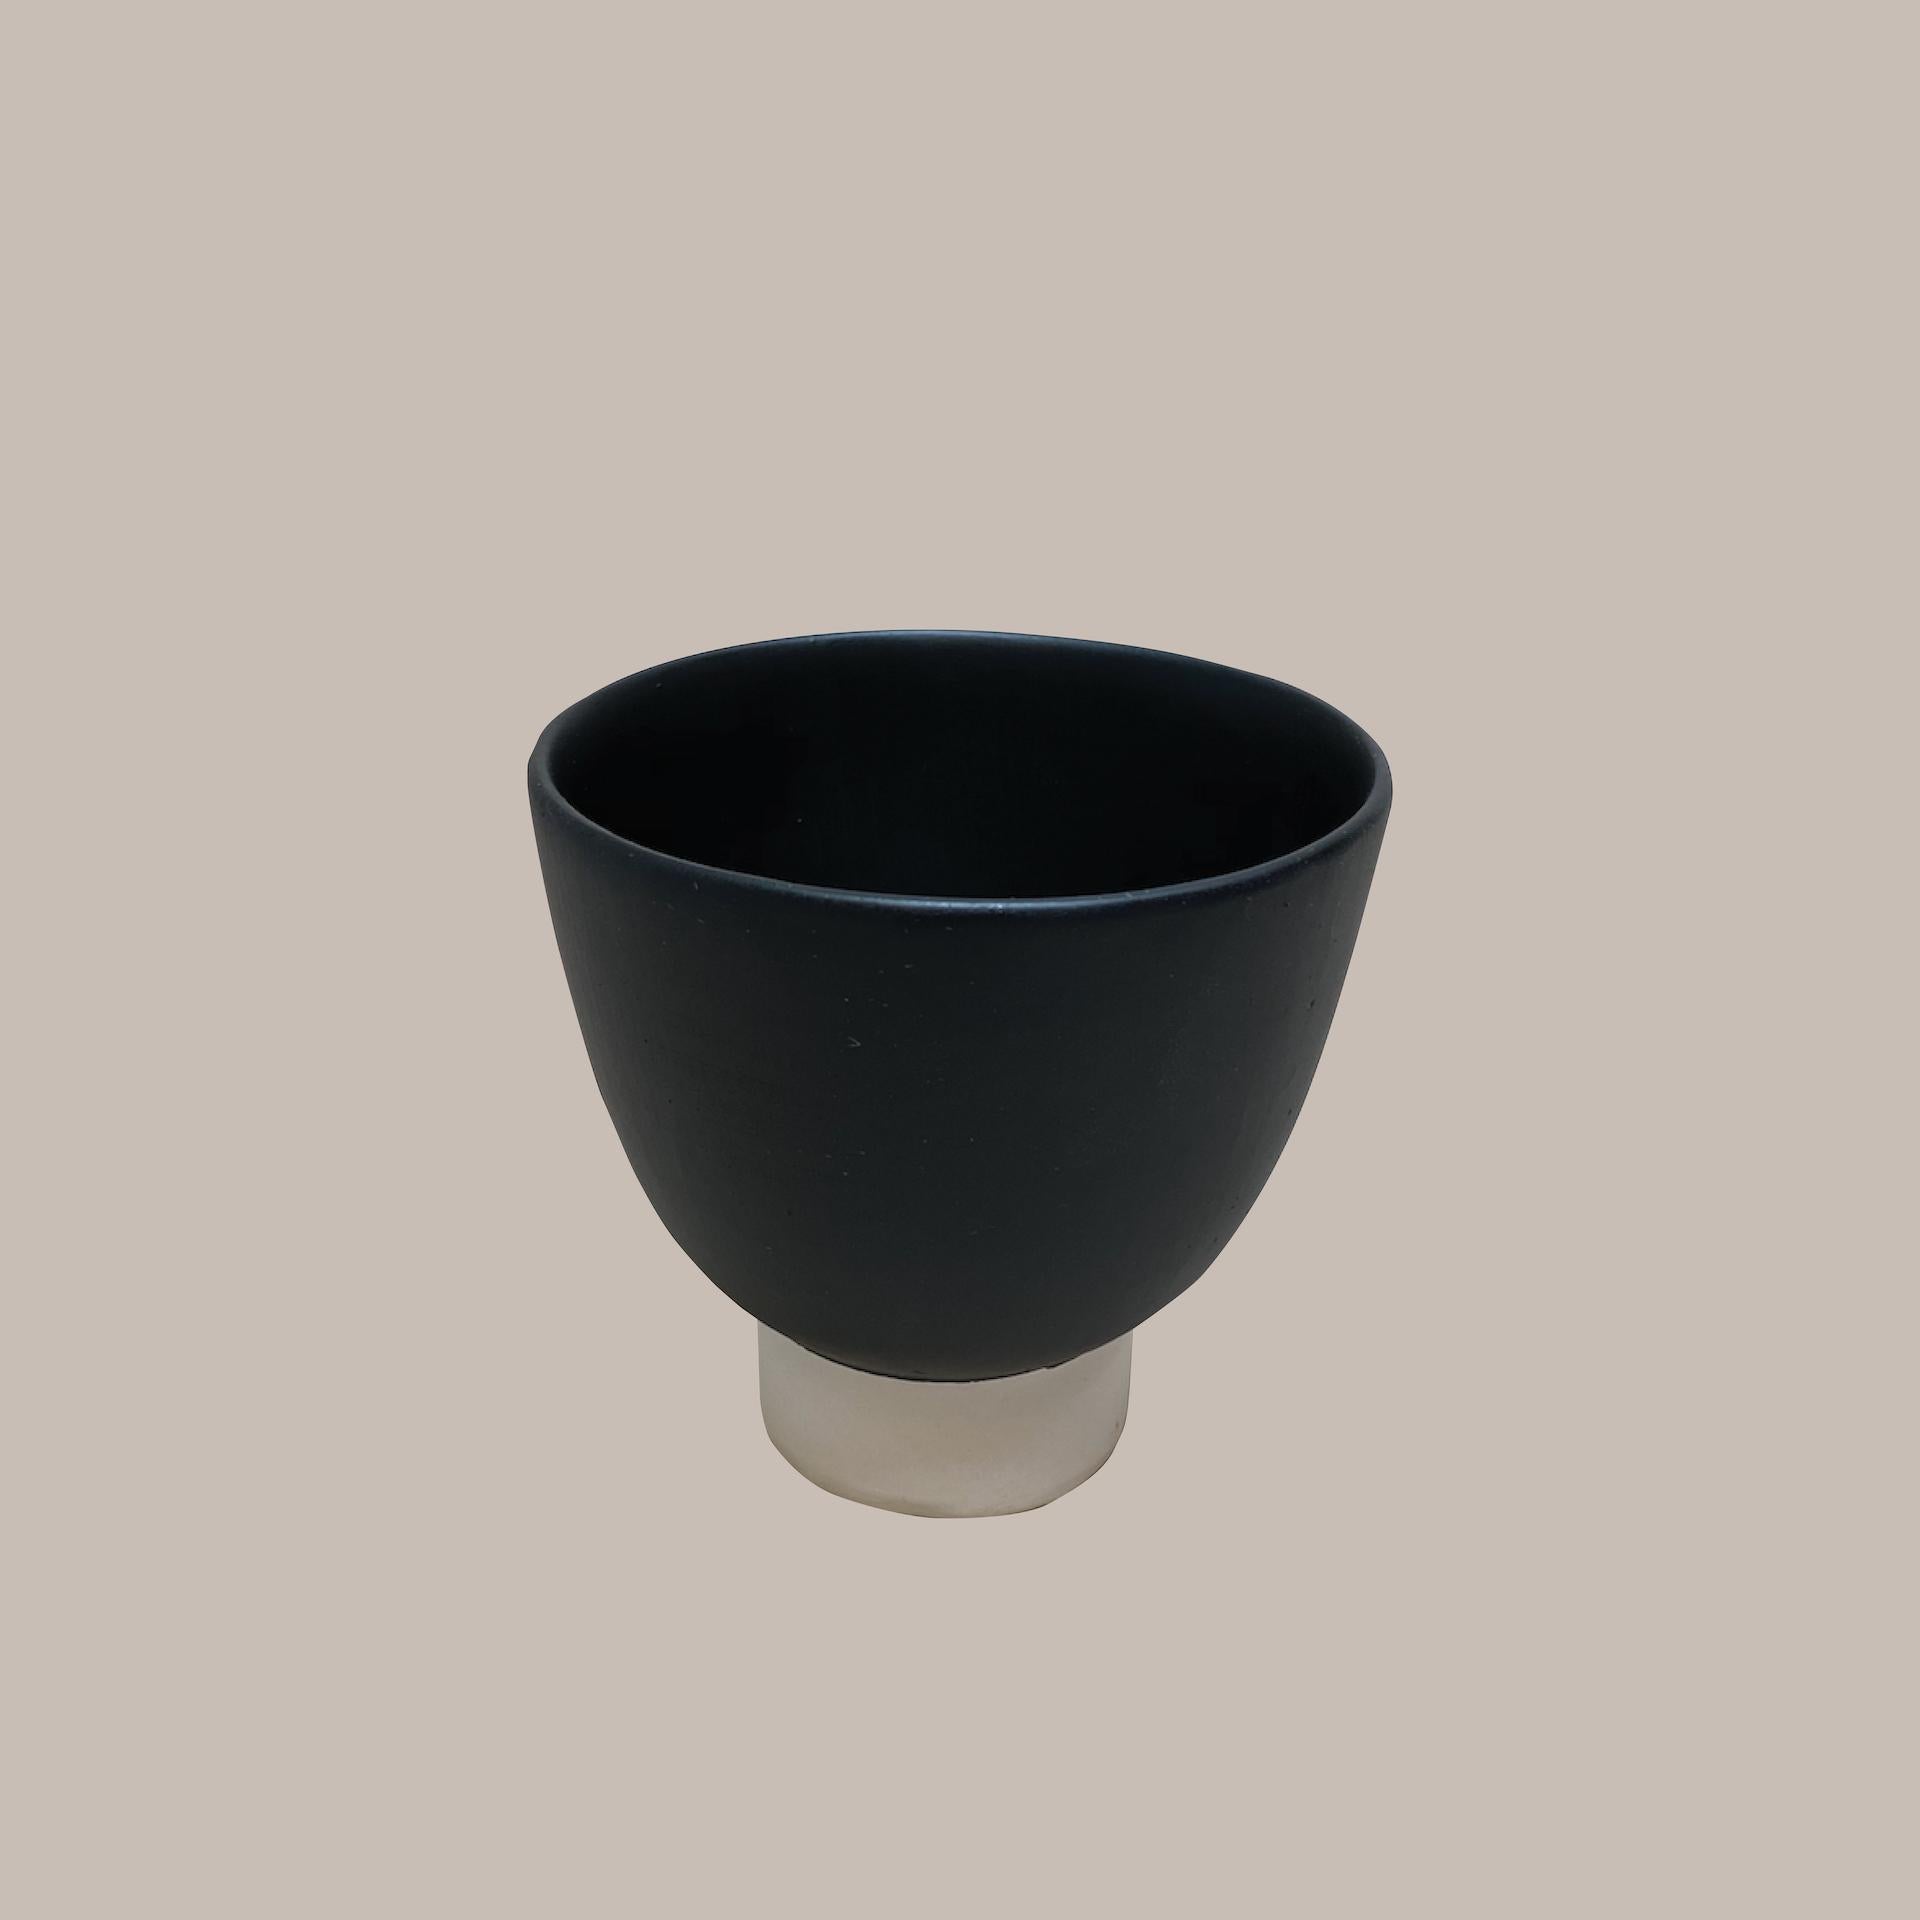 Modern Ott Another Paradigmatic Handmade Ceramic Cup by Studio Yoon Seok-Hyeon For Sale